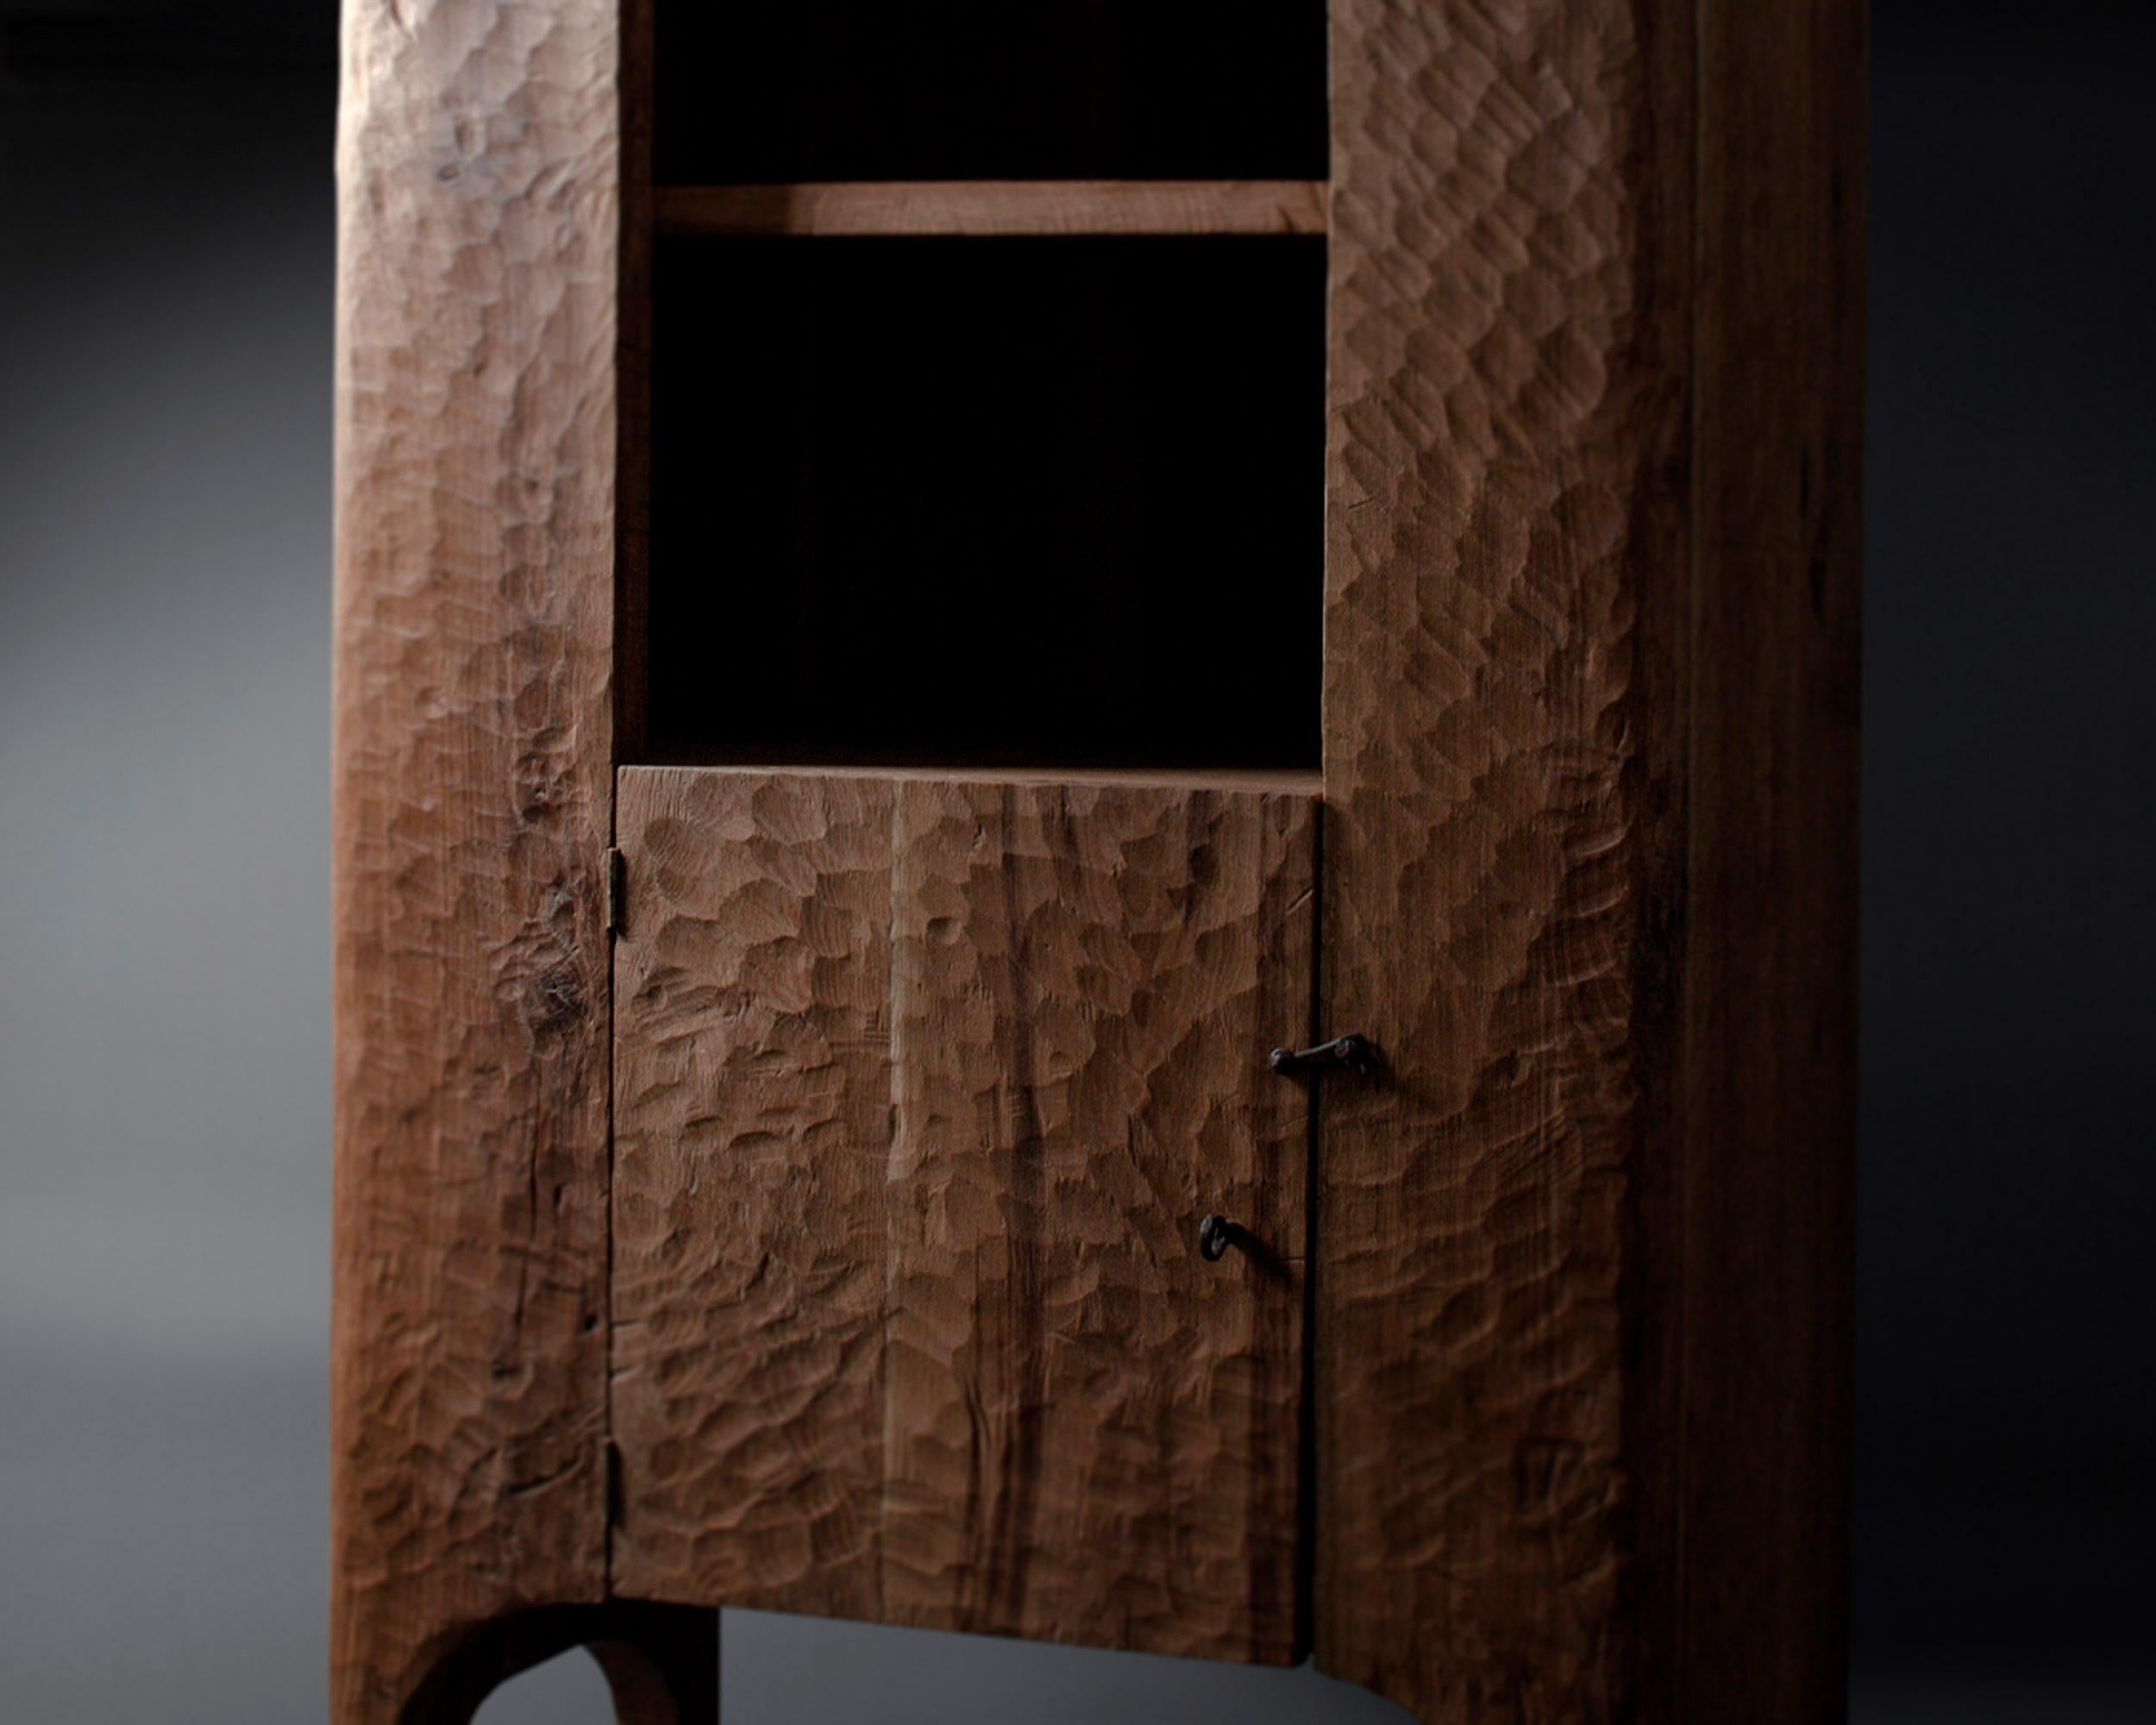 Cupboard made of solid oak (+ linseed oil)
Measures: 175 x 80 x 40 cm

SÓHA design studio conceives and produces furniture design and decorative objects in solid oak in an authentic style. Inspiration to create all these items comes from the Russian